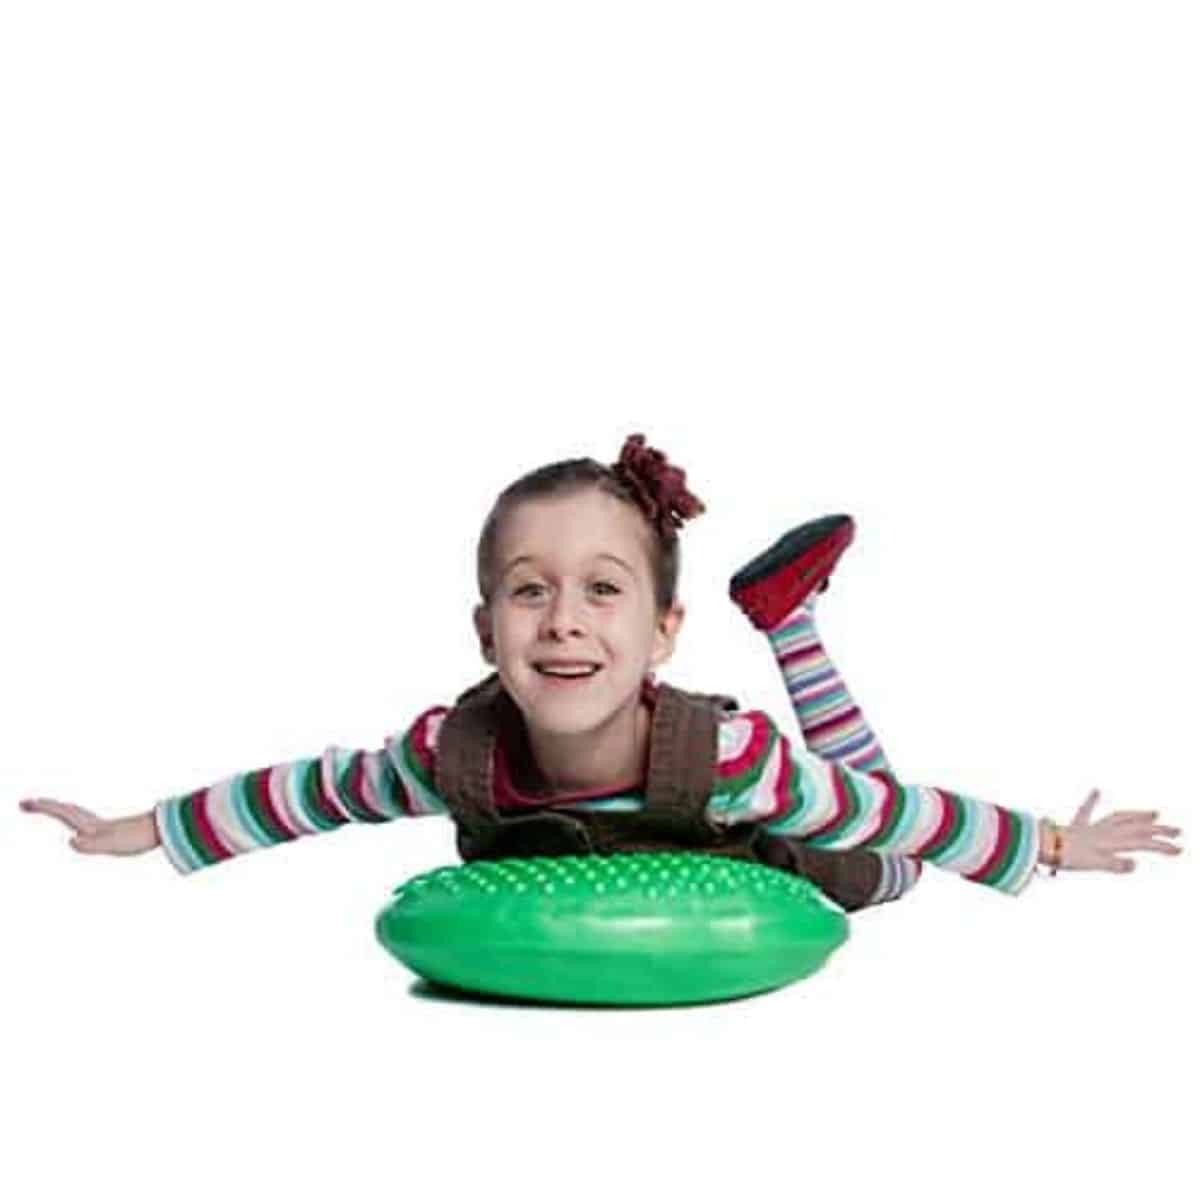 Wobble Cushions and wiggle seats can help your child with attention, staying seated, core strength, or balance. Get the best wobble cushions for 2022! 